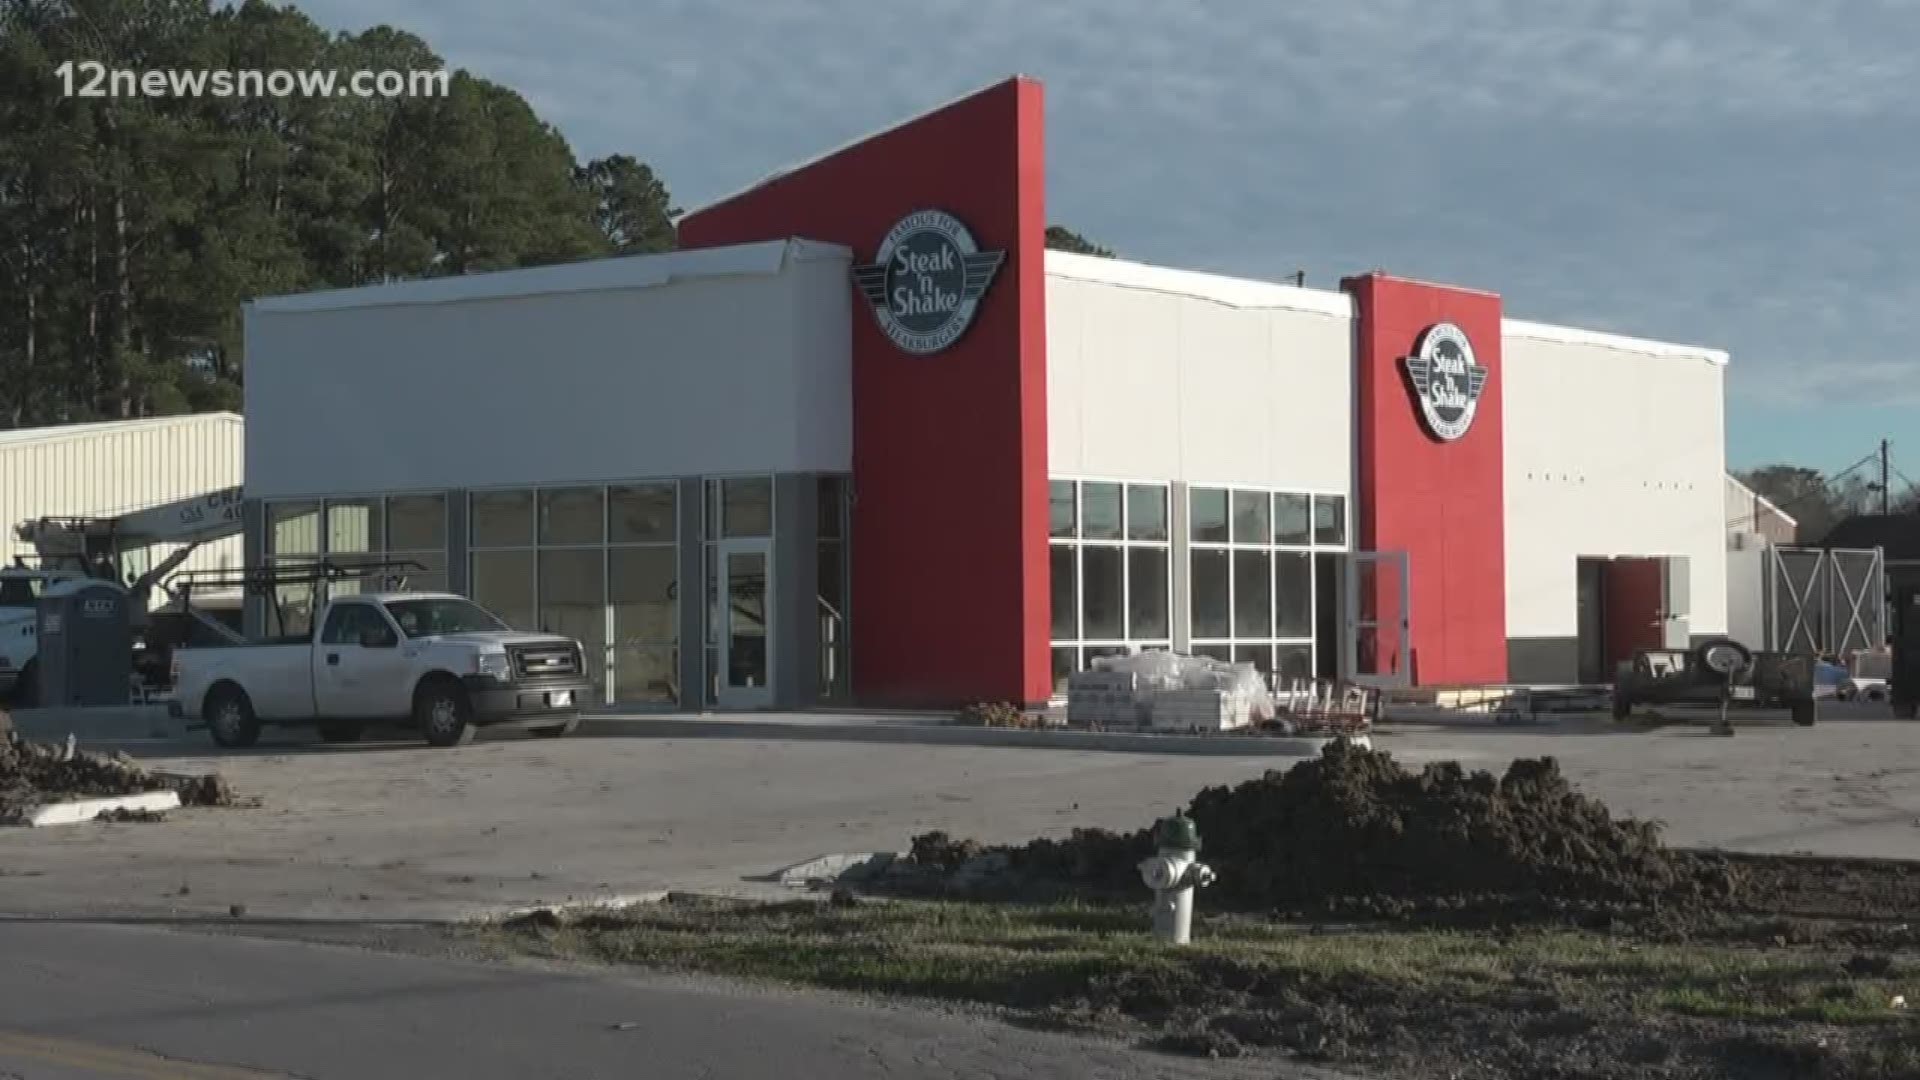 Beaumont will see new store, restaurant additions in the next few months